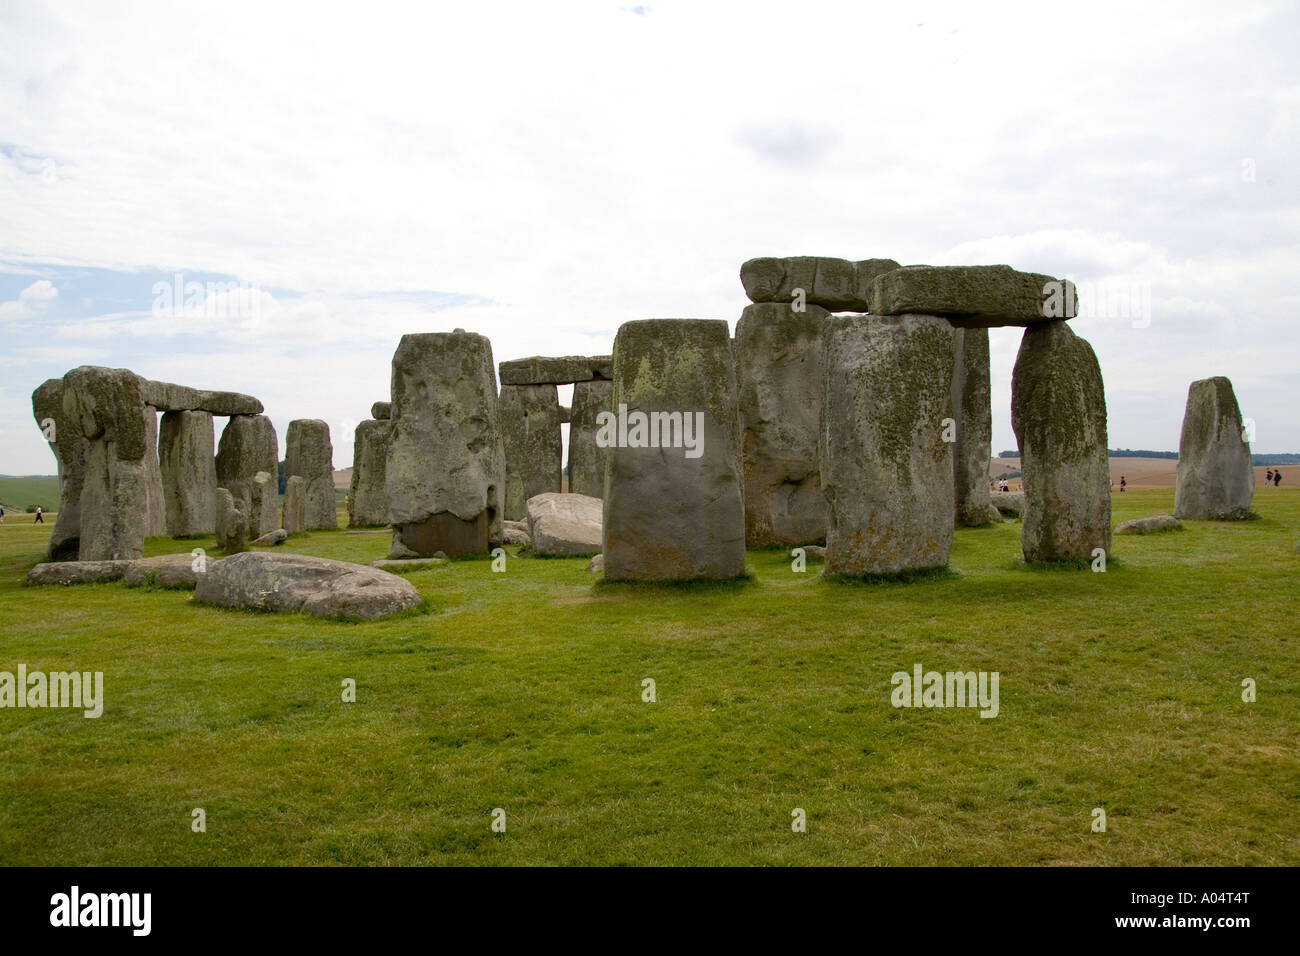 The world famous Stonehenge monument in England Great Britian Stock Photo